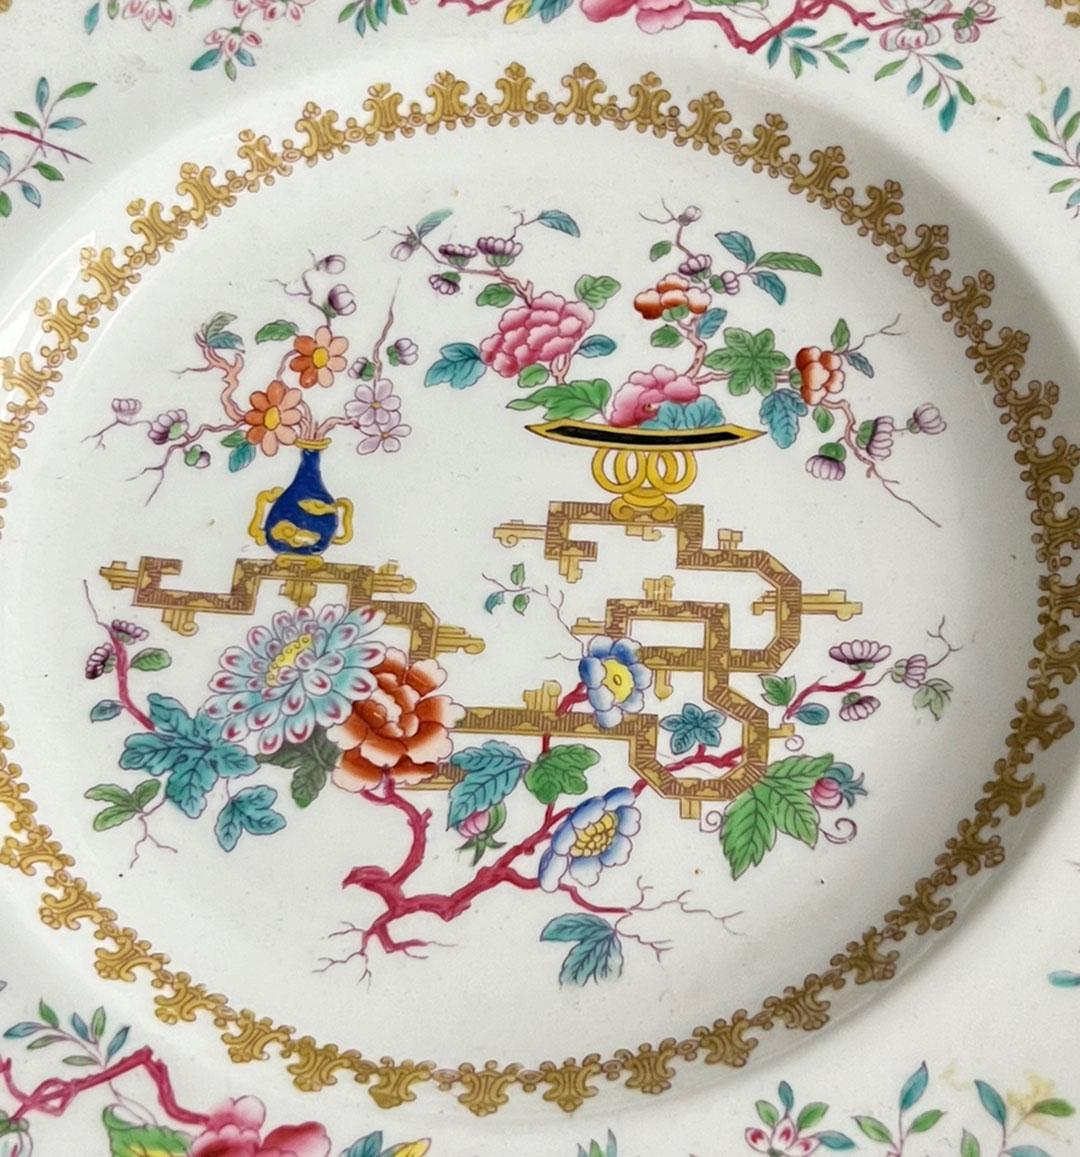 An early antique Minton Chinese Tree chinoiserie plate with scalloped edge. Signed on back pattern number 1959. Chinese tree with vases of peonies and blossoms hand painted. Circa 1840s.